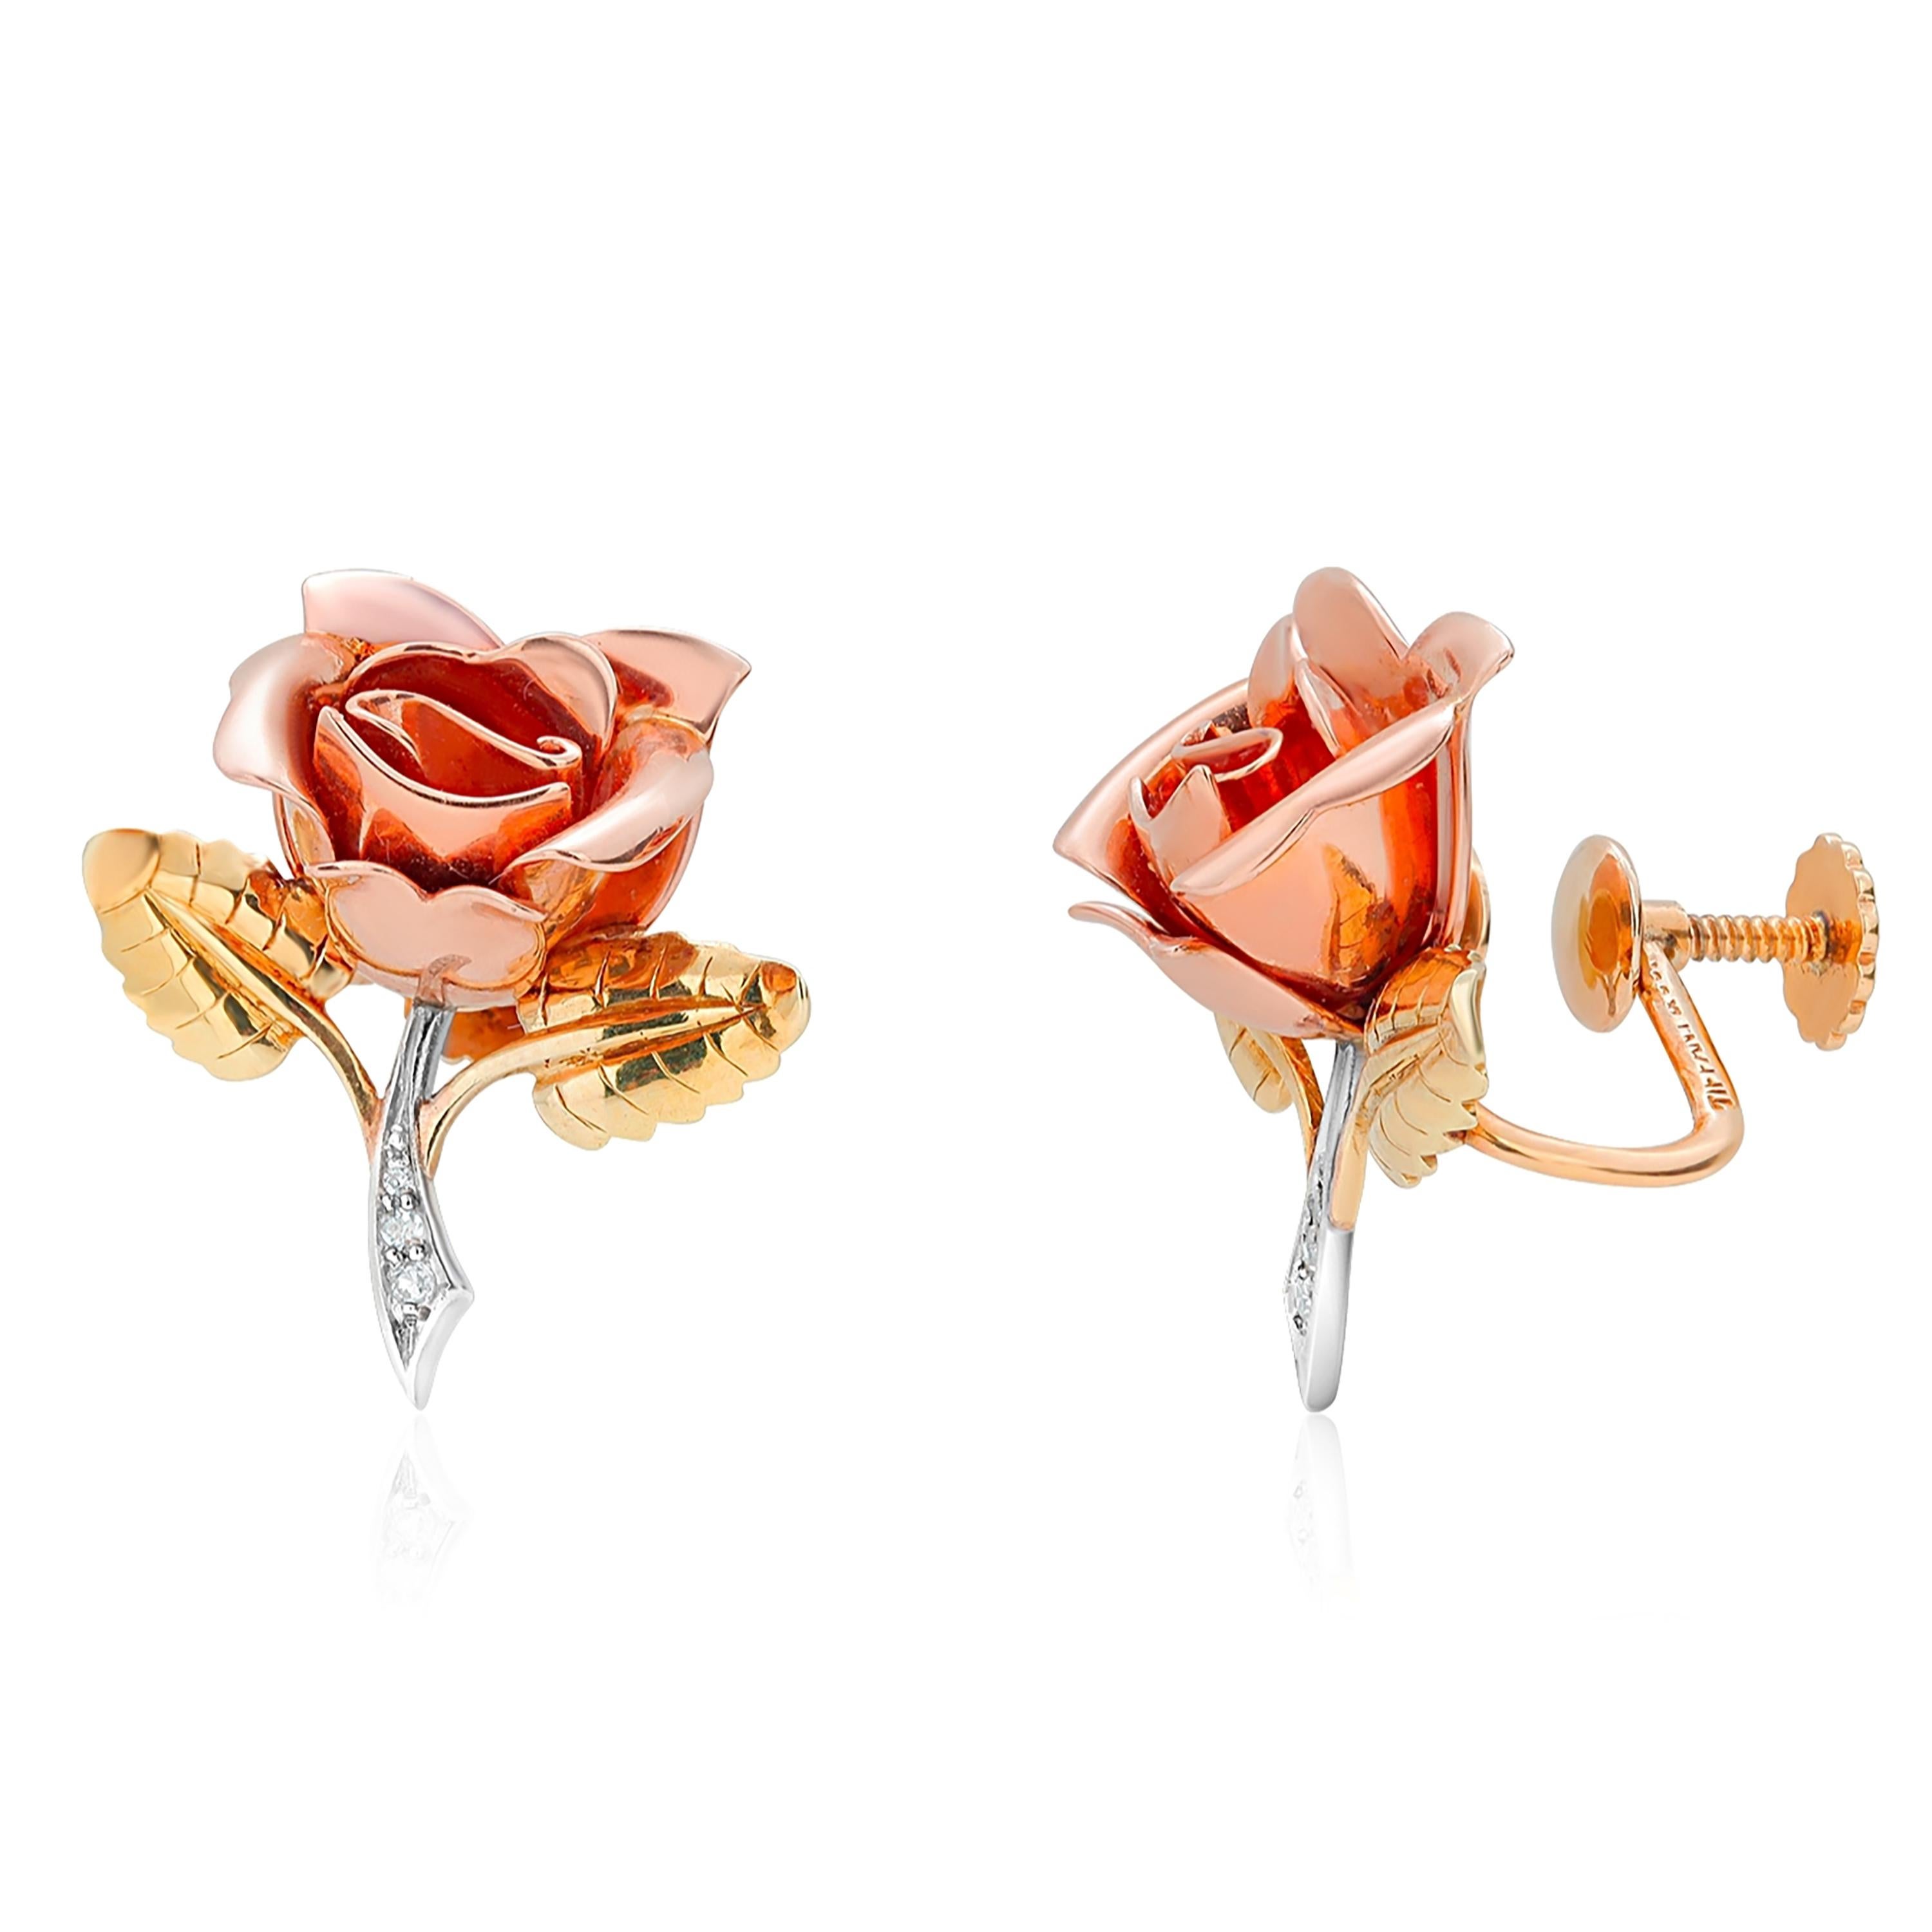 Retro Tiffany and Co Circa 1940s Yellow White and Rose Gold Floral Diamond Earrings